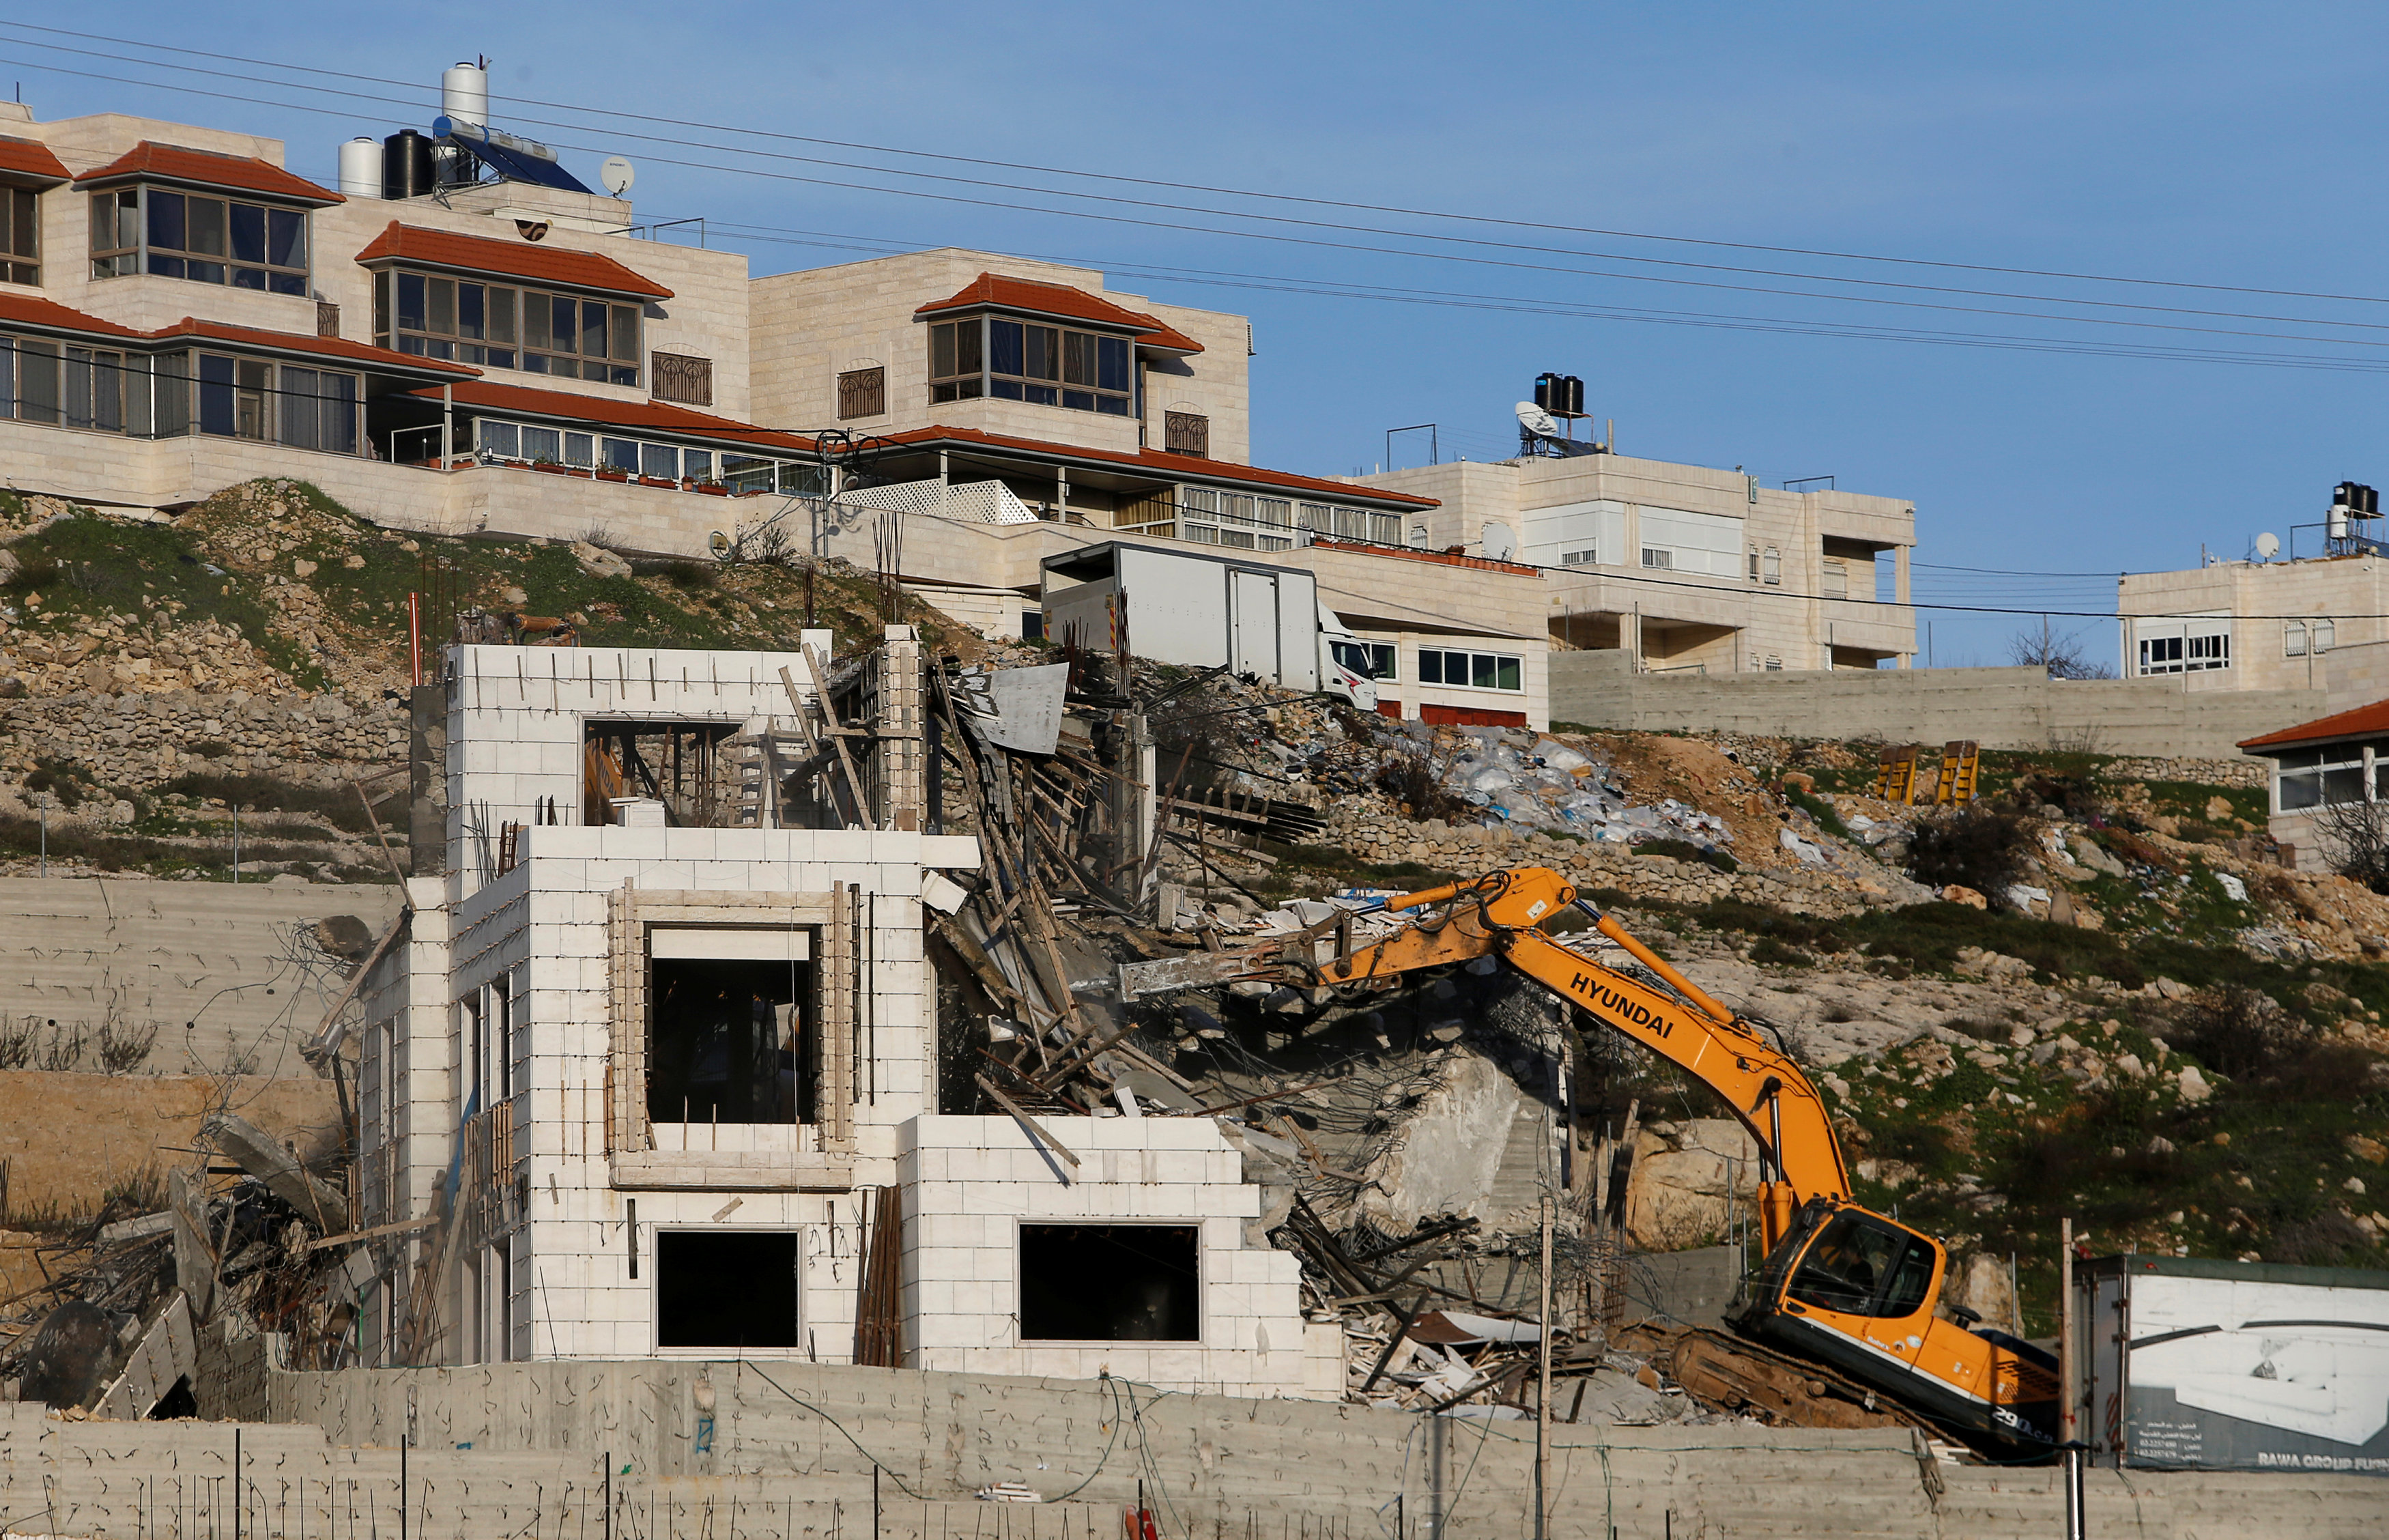 An Israeli machinery demolishes an under-construction Palestinian residential building near Hebron, in the occupied West Bank February 14, 2018.